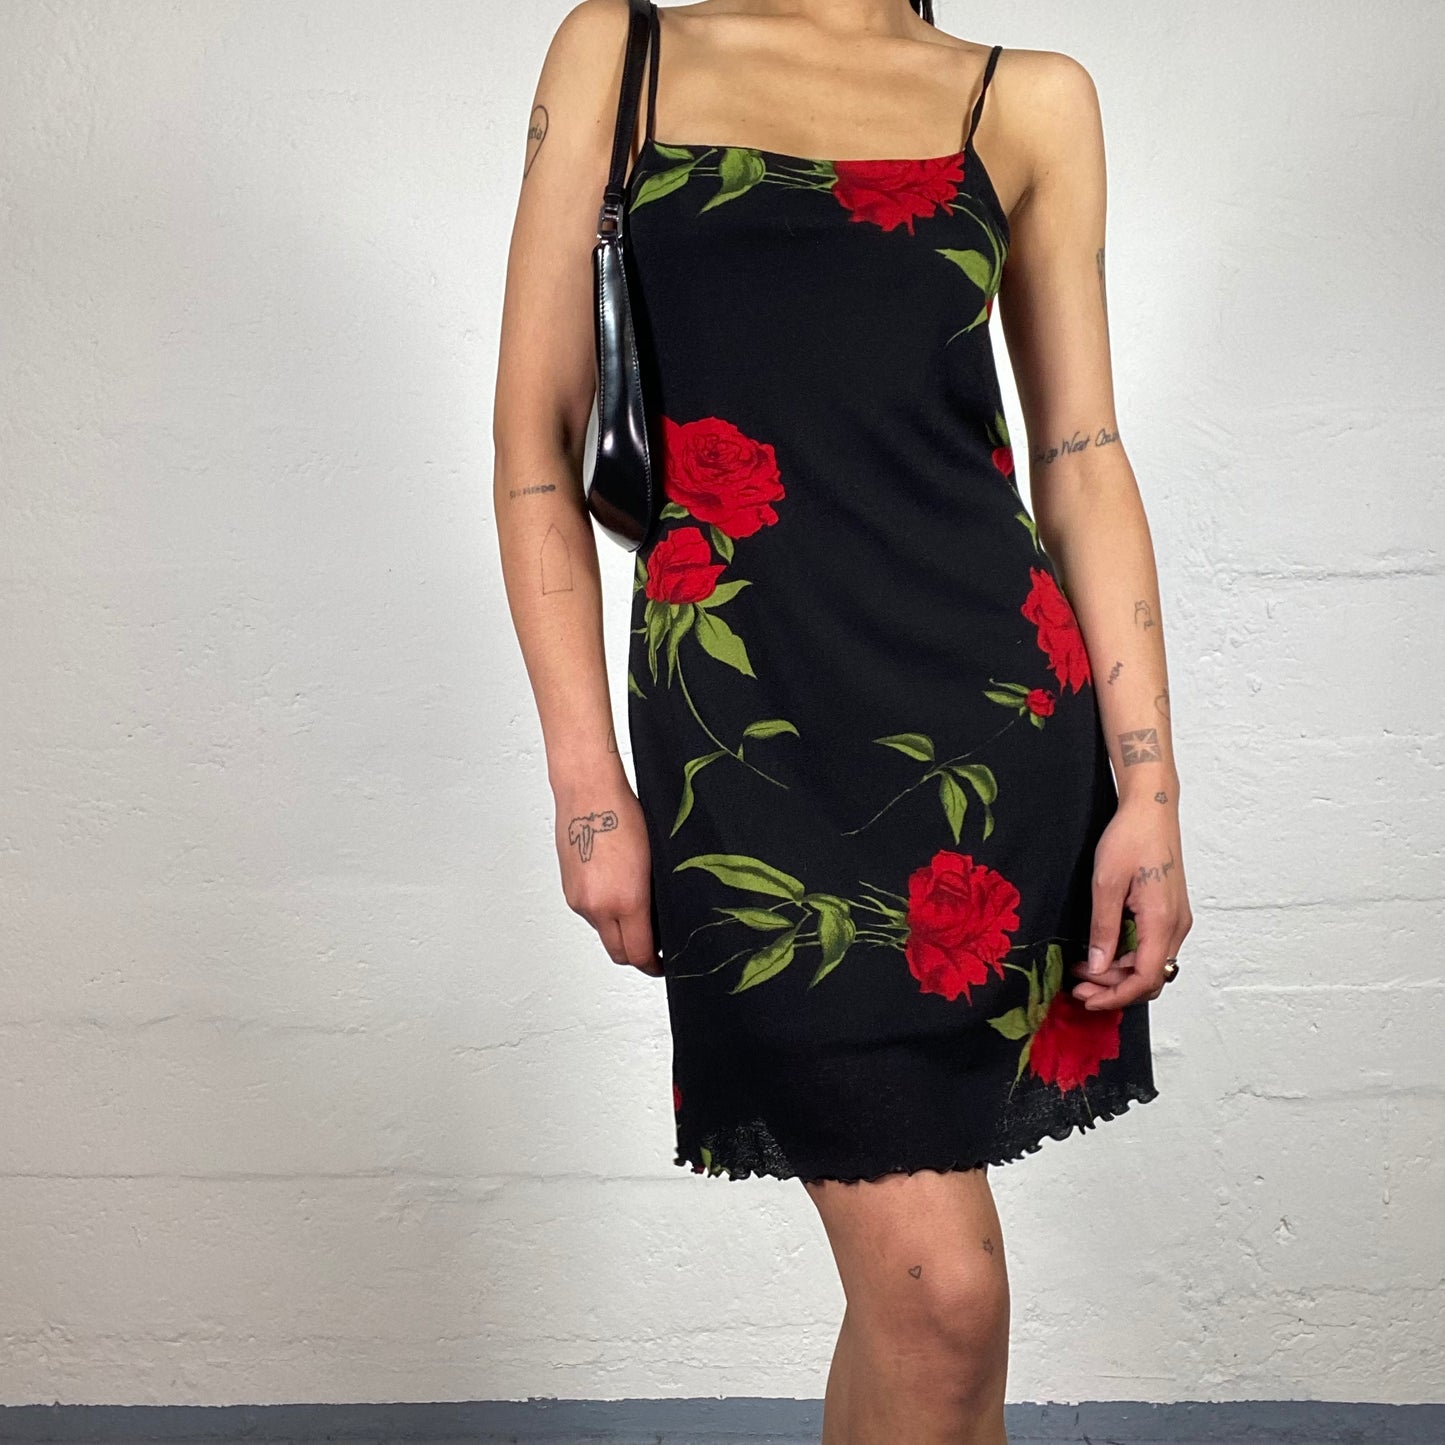 Vintage 2000's Romantic Black Camisole Dress with Red Roses Print (S)